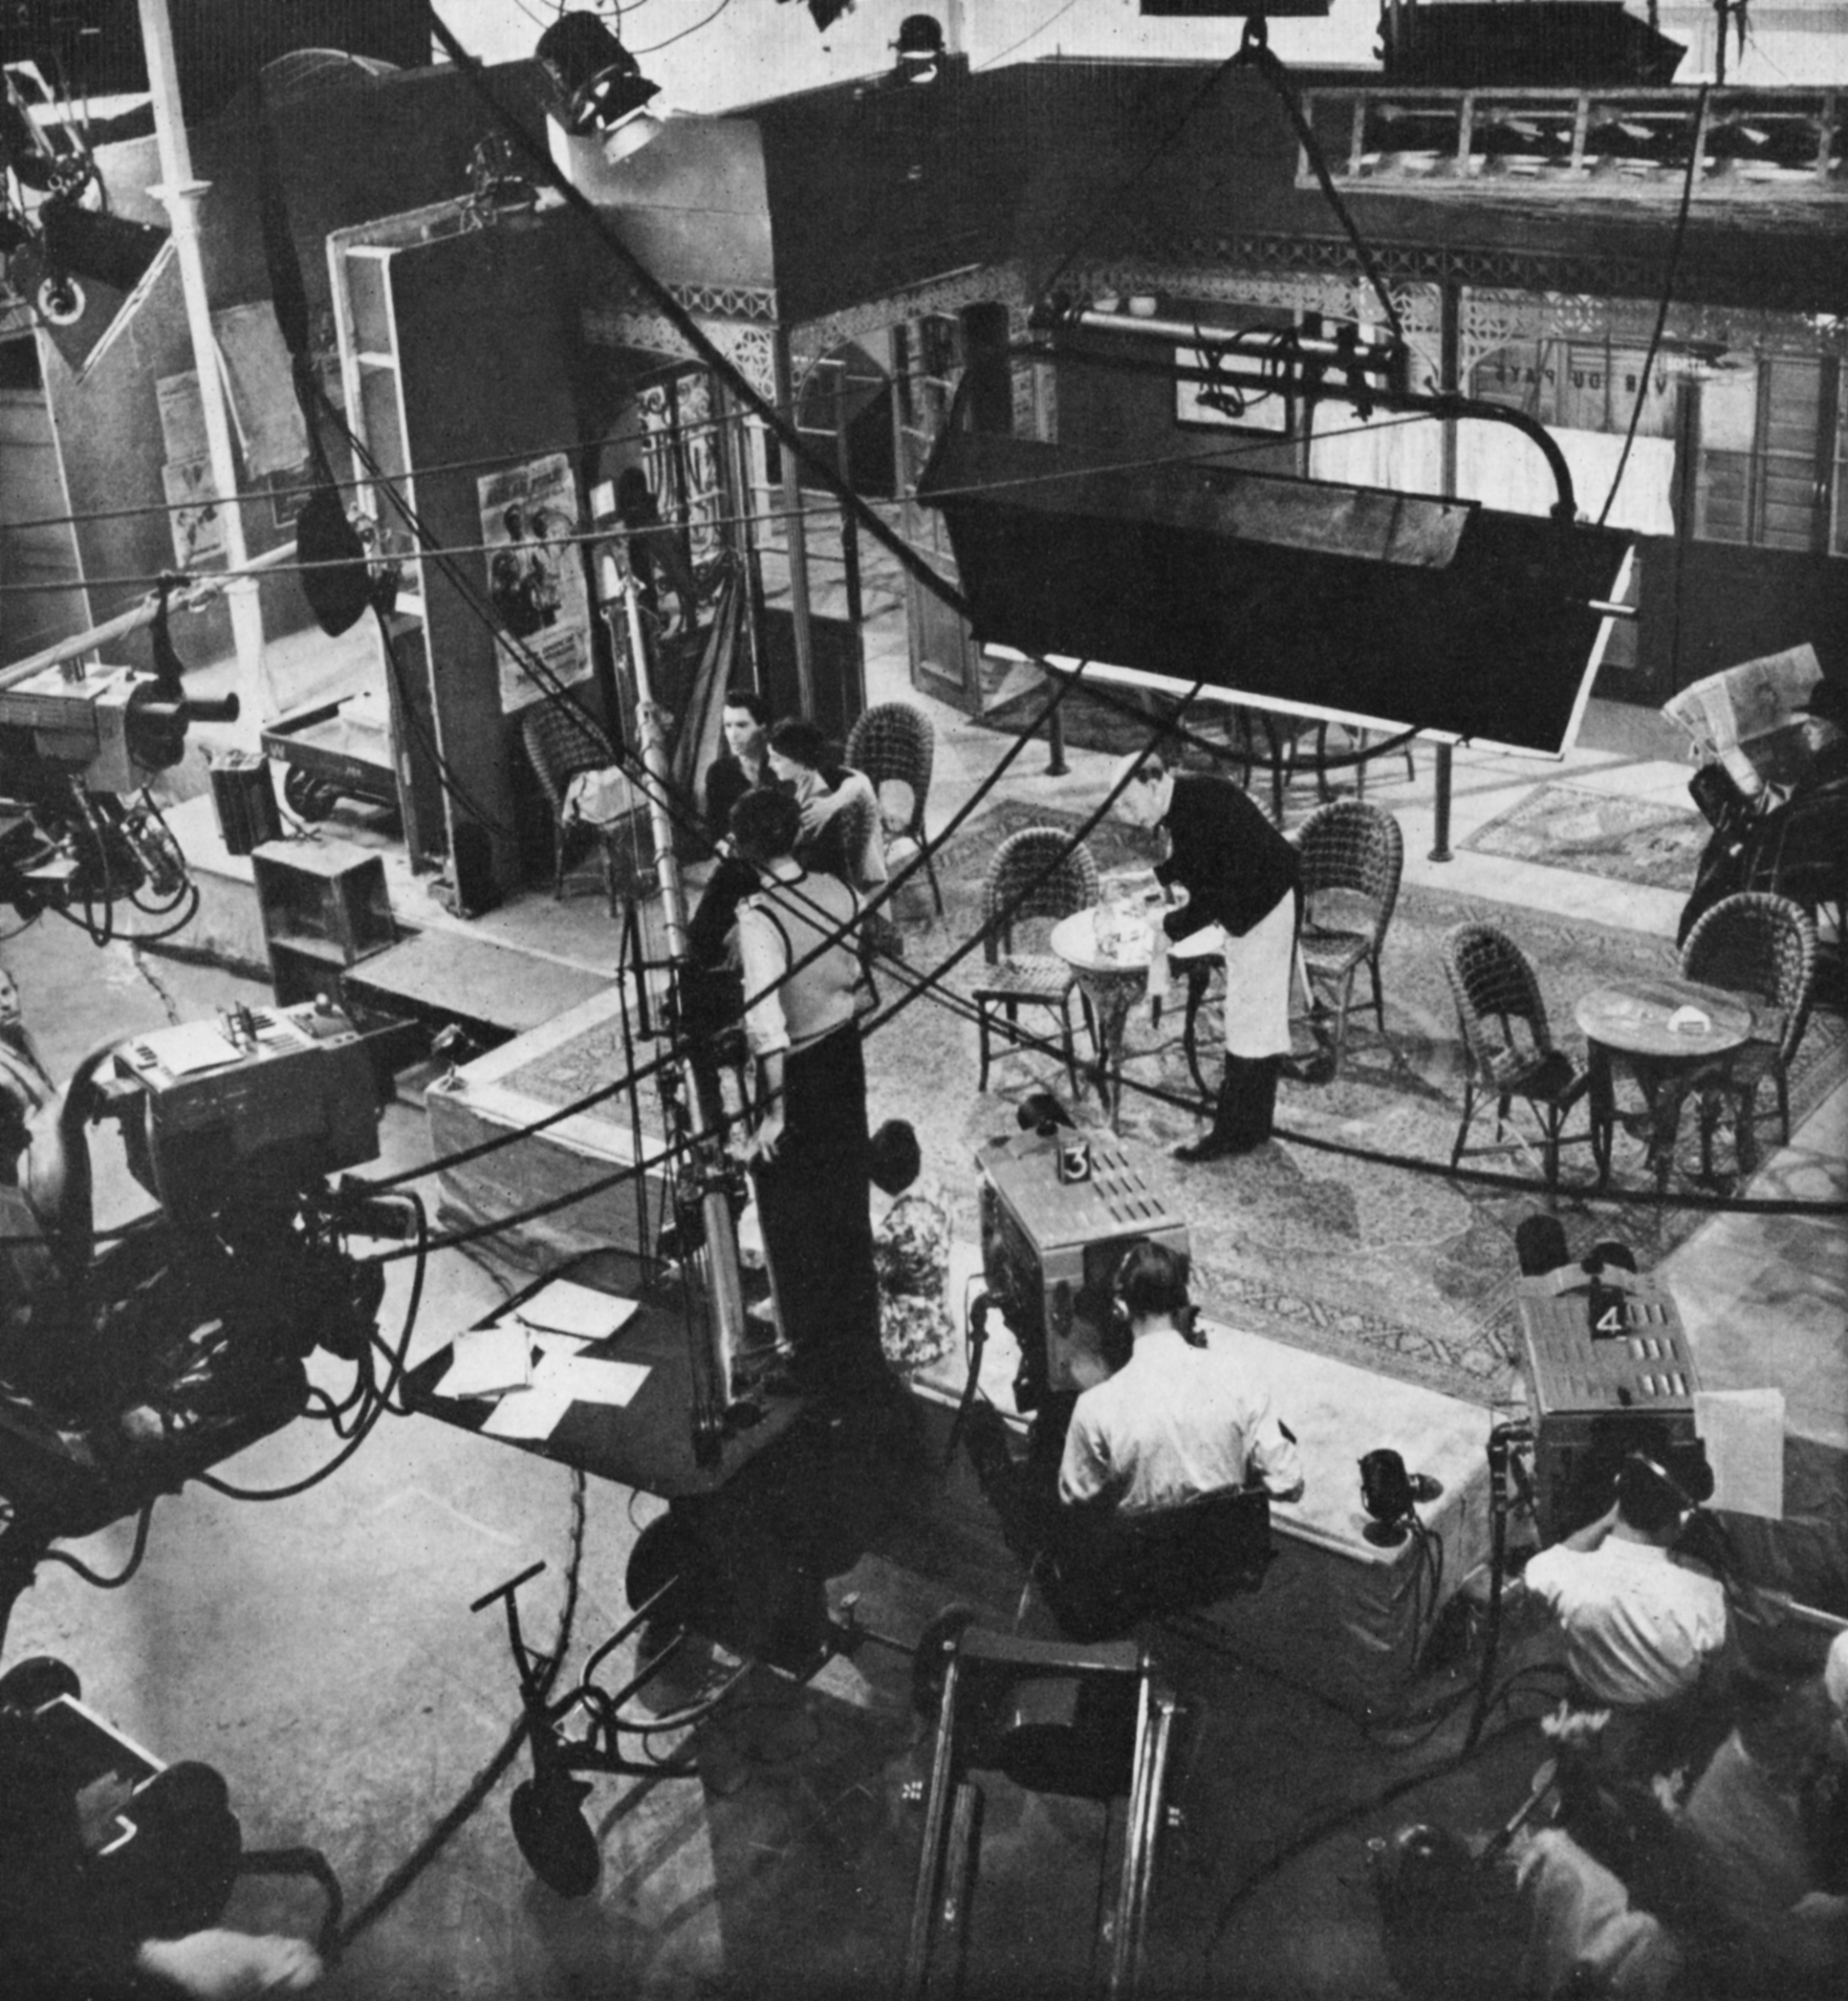 A view of the entire sound stage.